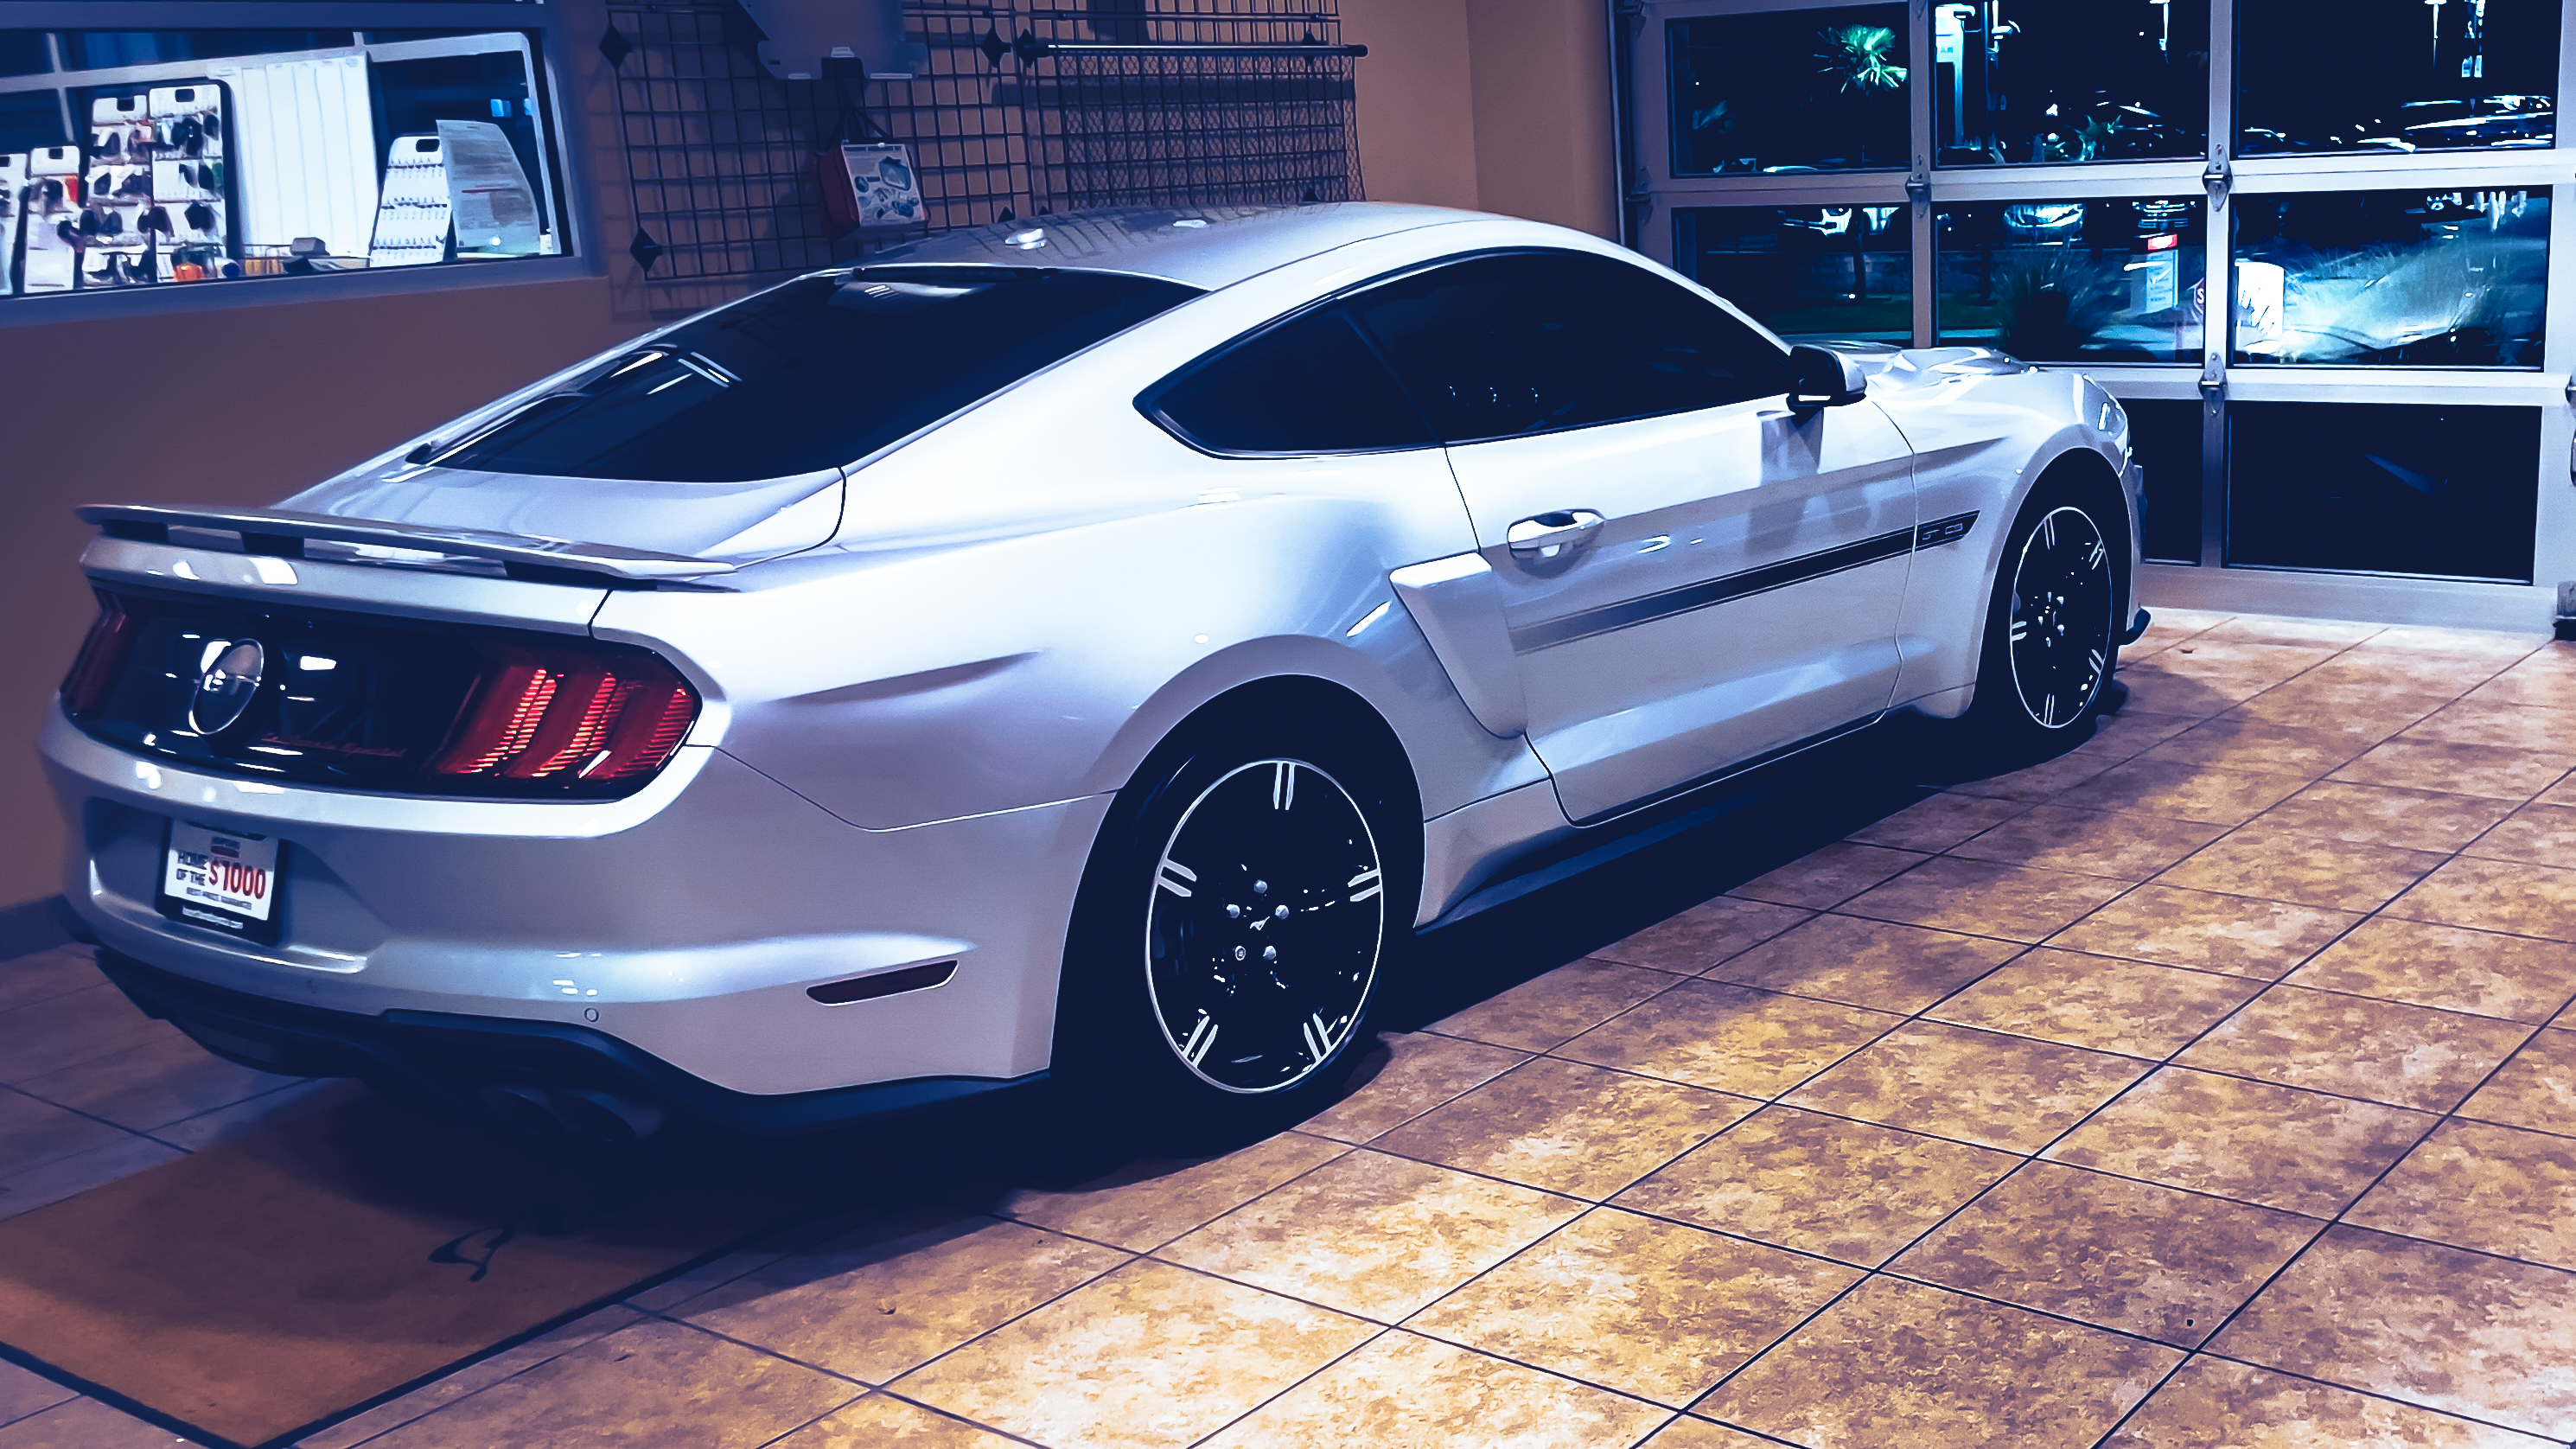 Ford Mustang Car Vehicle Gray Cars Rear View 2980x1676